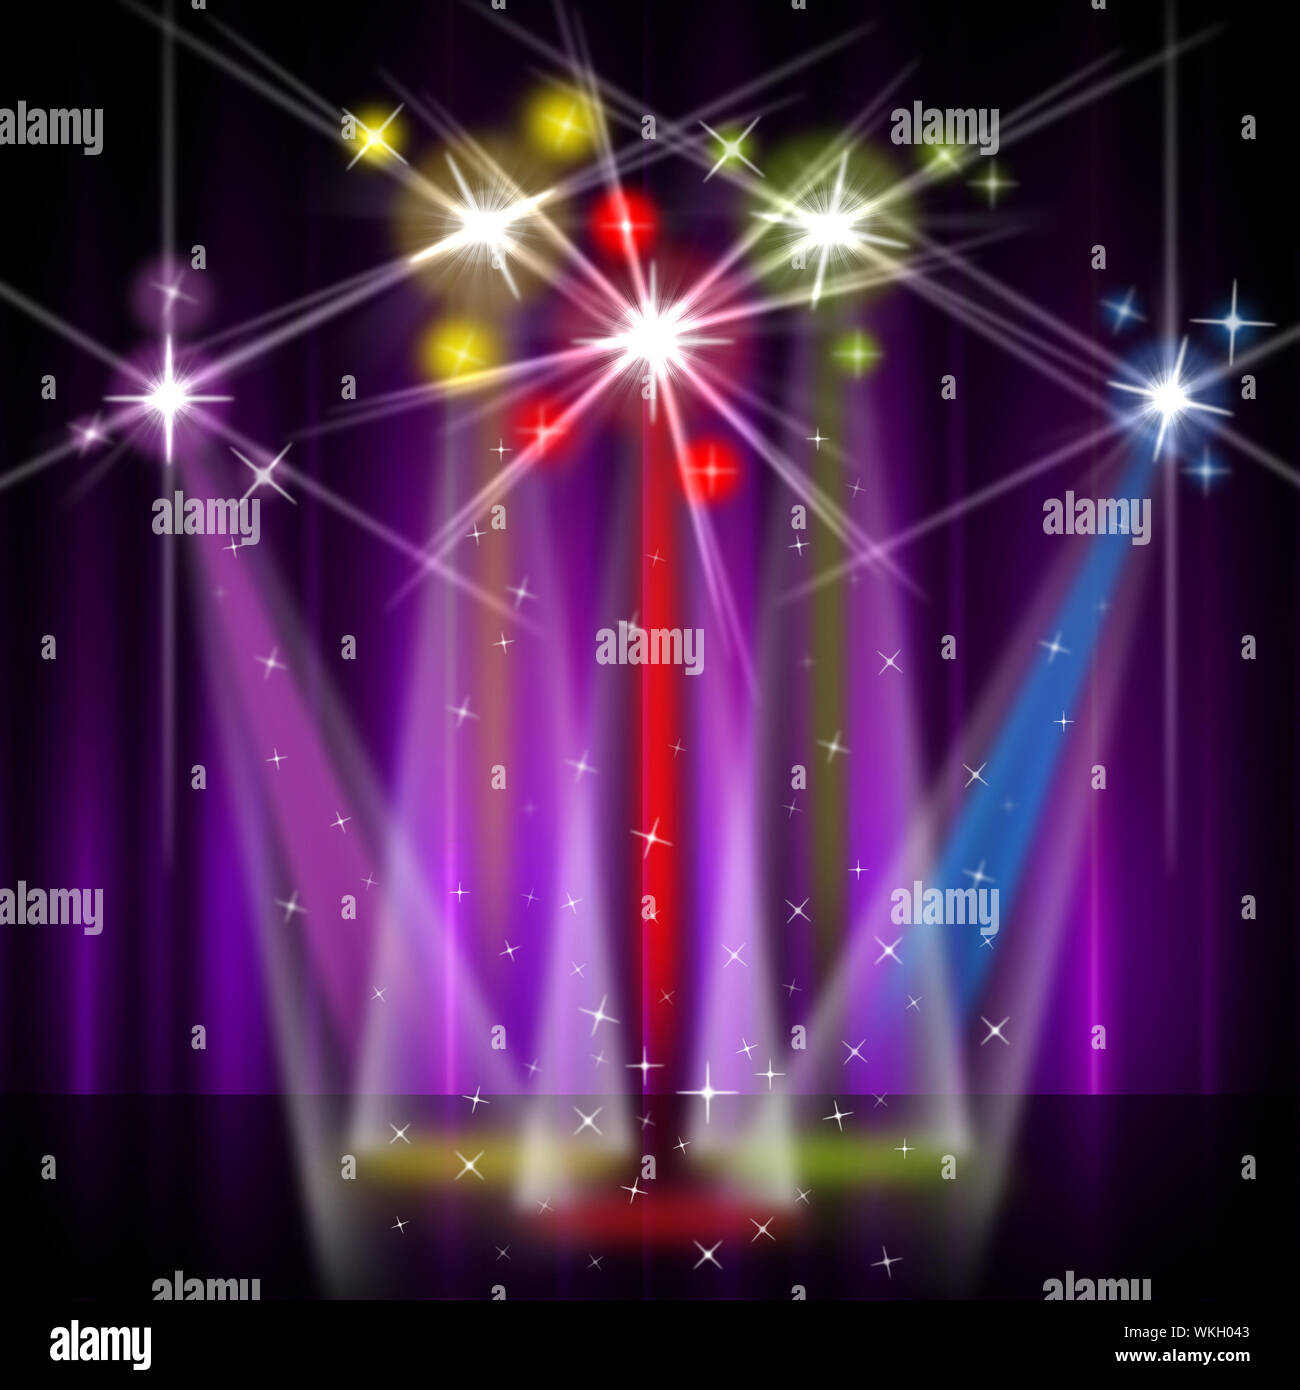 Stage Red Meaning Lightsbeams Of Light And Lightsbeams Of Light Stock Photo  - Alamy